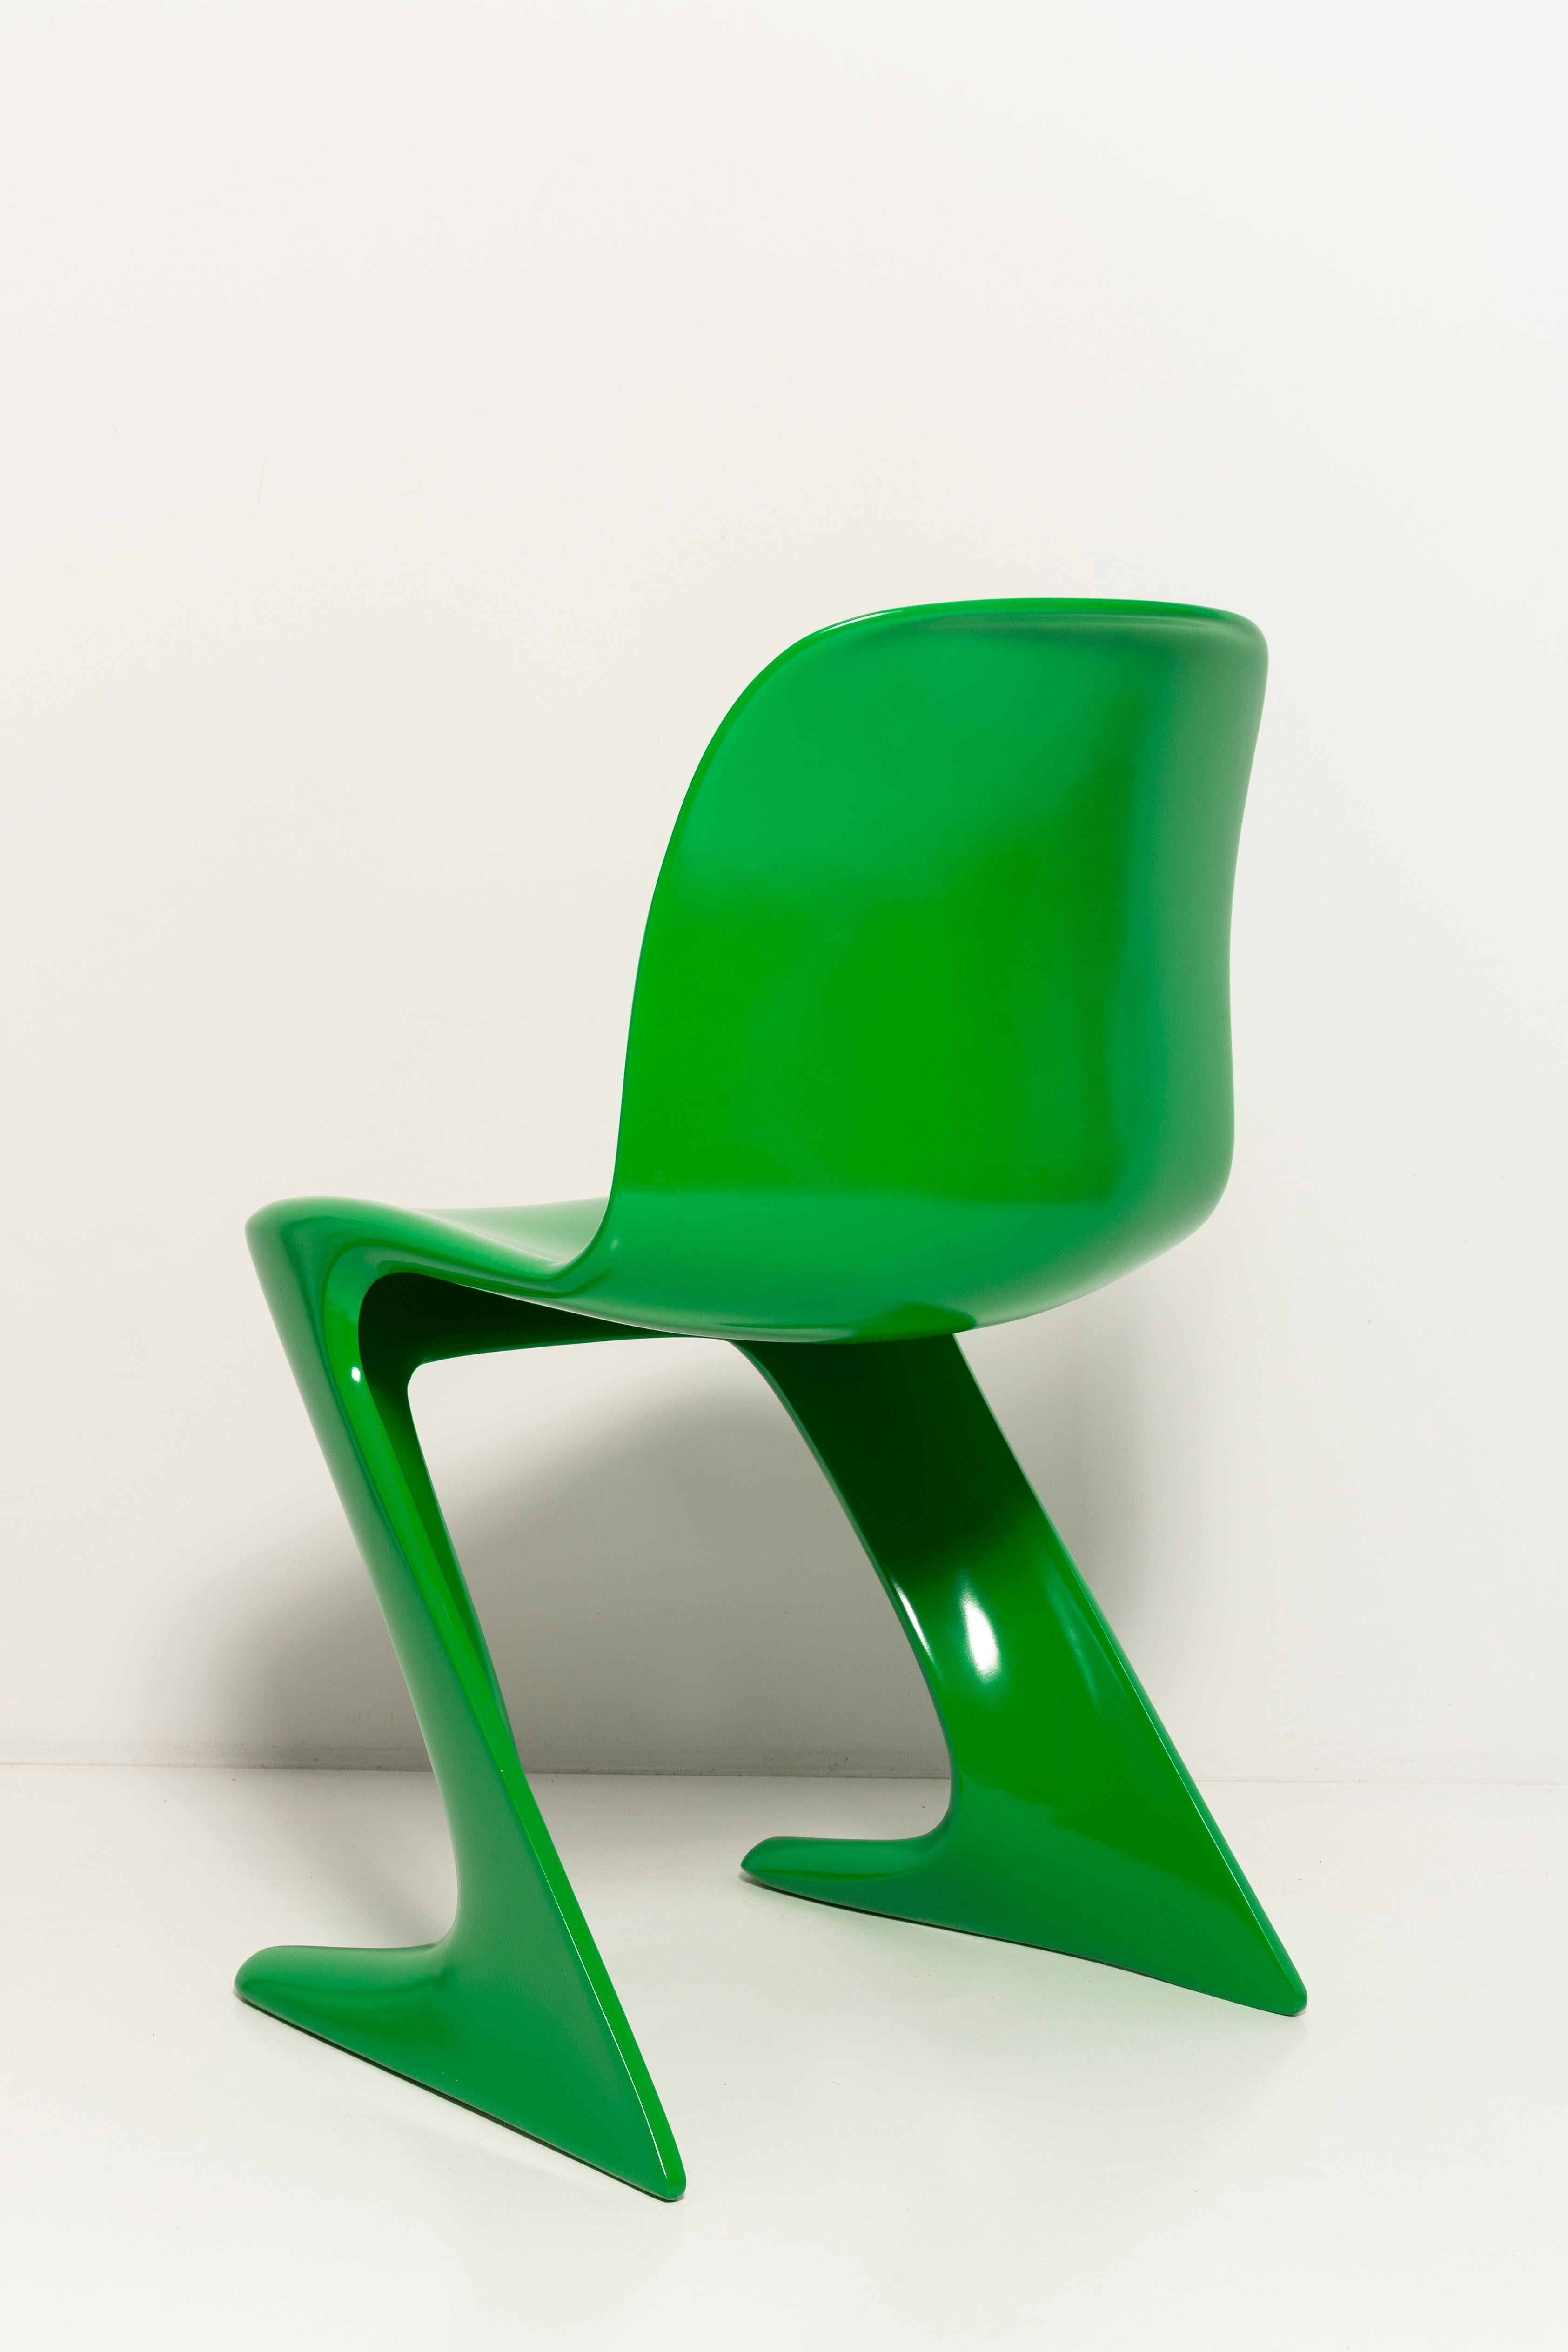 Set of Four Green Kangaroo Chairs Designed by Ernst Moeckl, Germany, 1960s For Sale 3